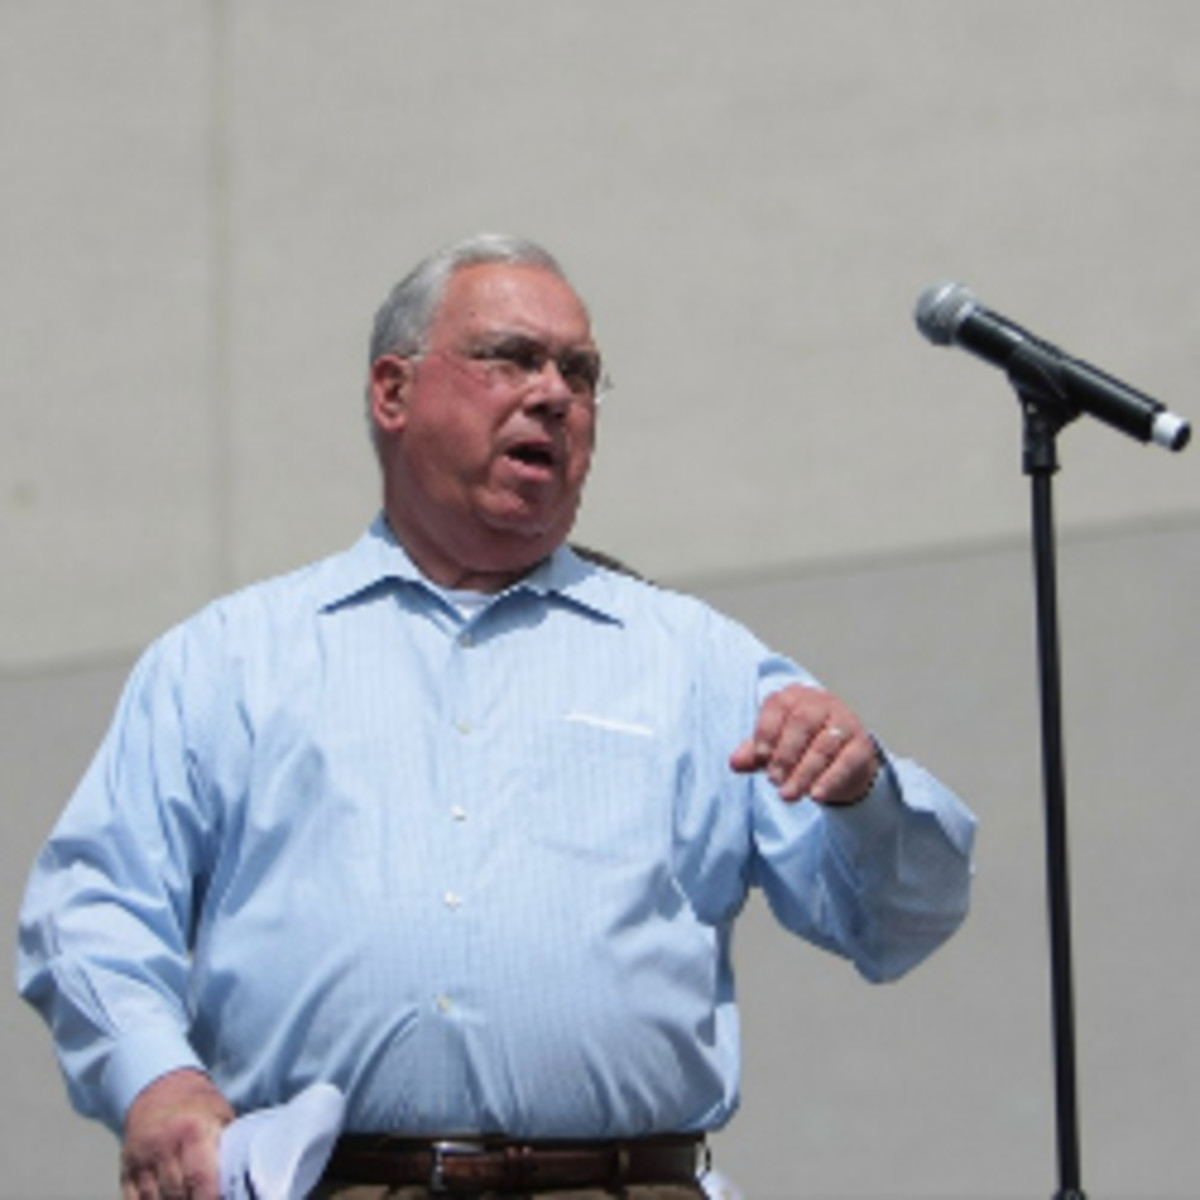 The Boston Olympic Exploratory Committee hopes to gain Mayor Thomas Menino's approval in its bid to bring the 2024 Games to the city. (Fred Kfoury/Icon SMI)